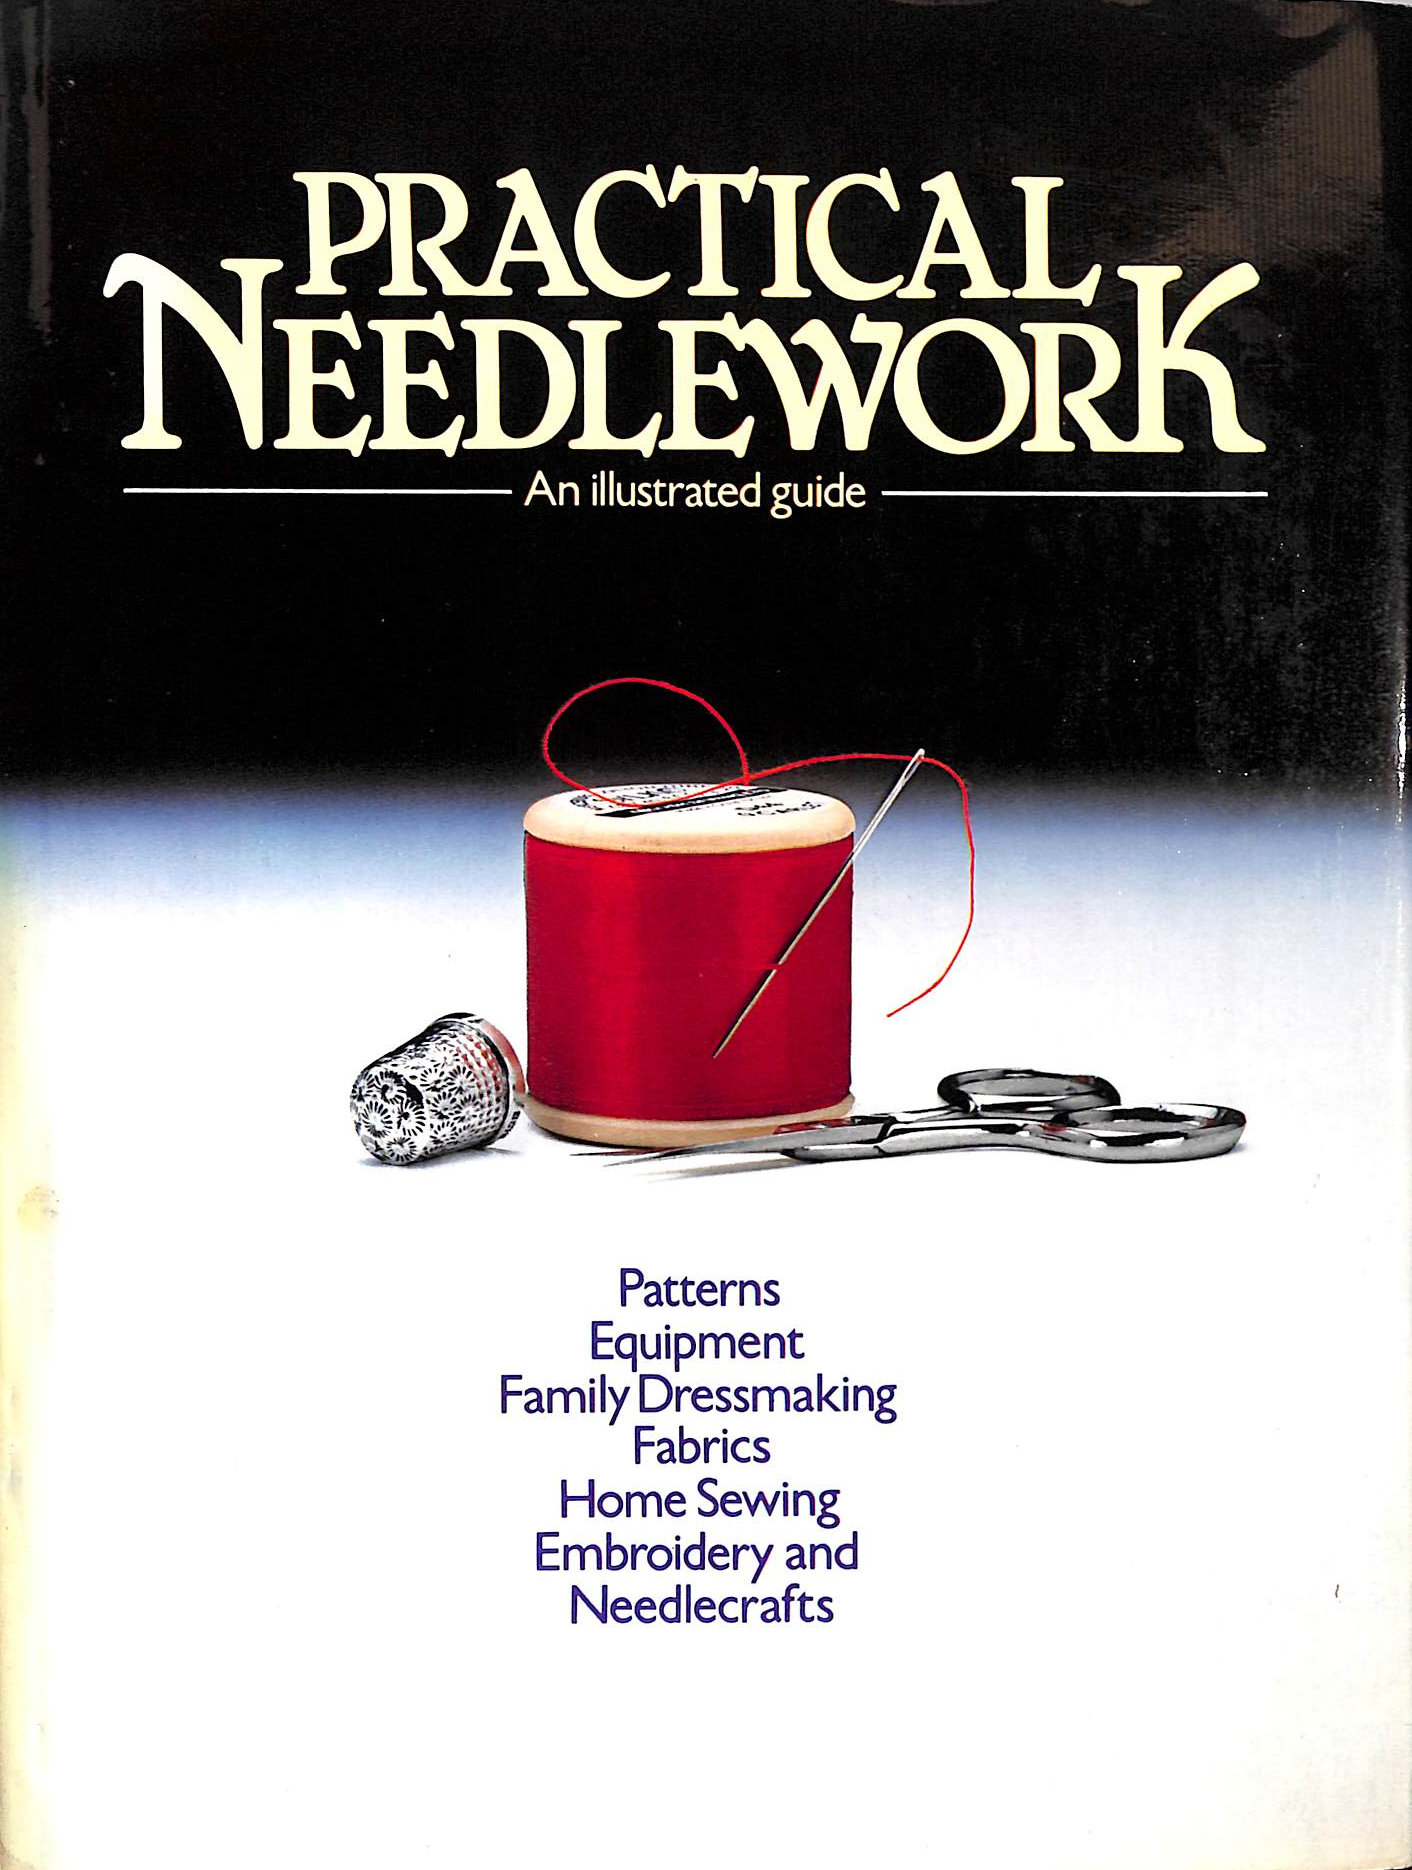 NO AUTHOR. - Practical Needlework: Illustrated Guide